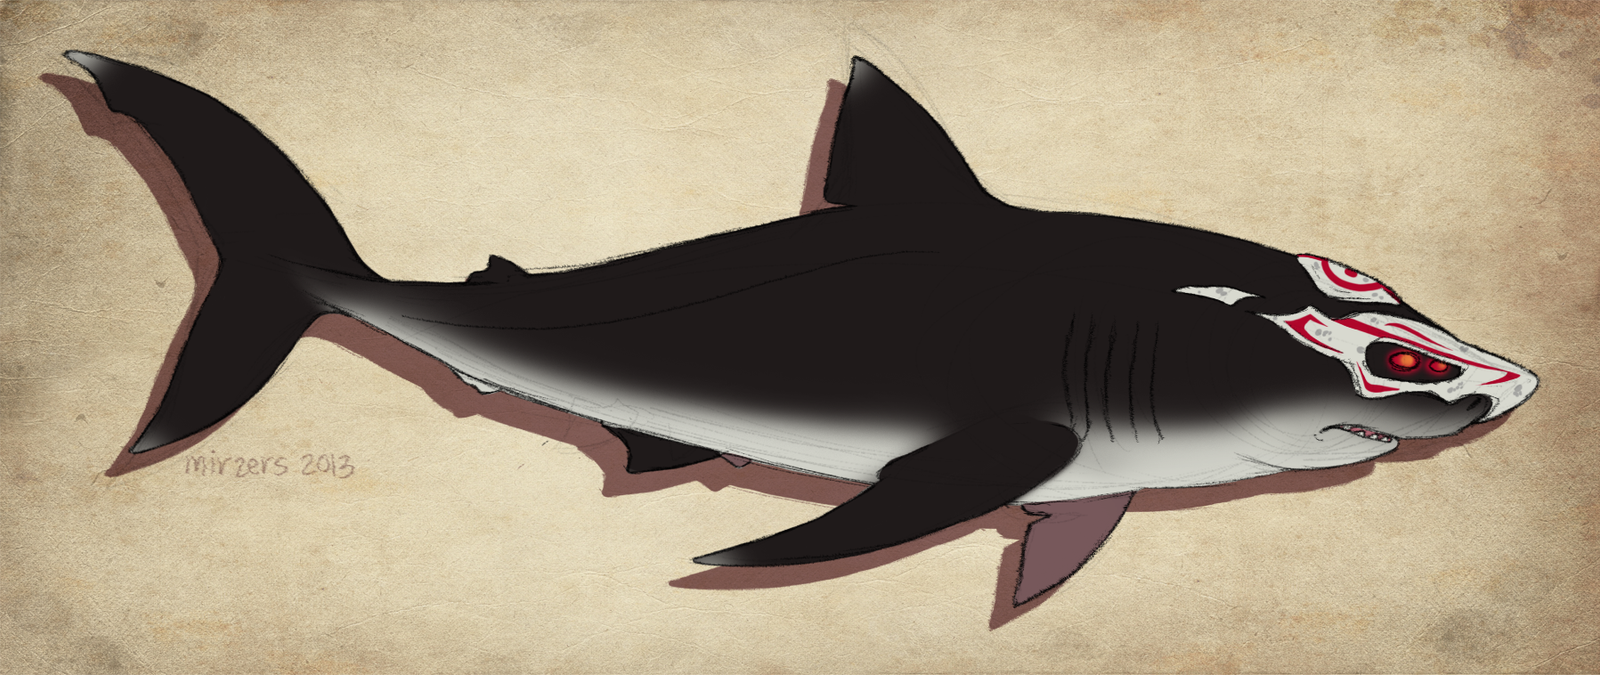 rwby_grimm__shark_by_mirzers-d6nm4uy.png